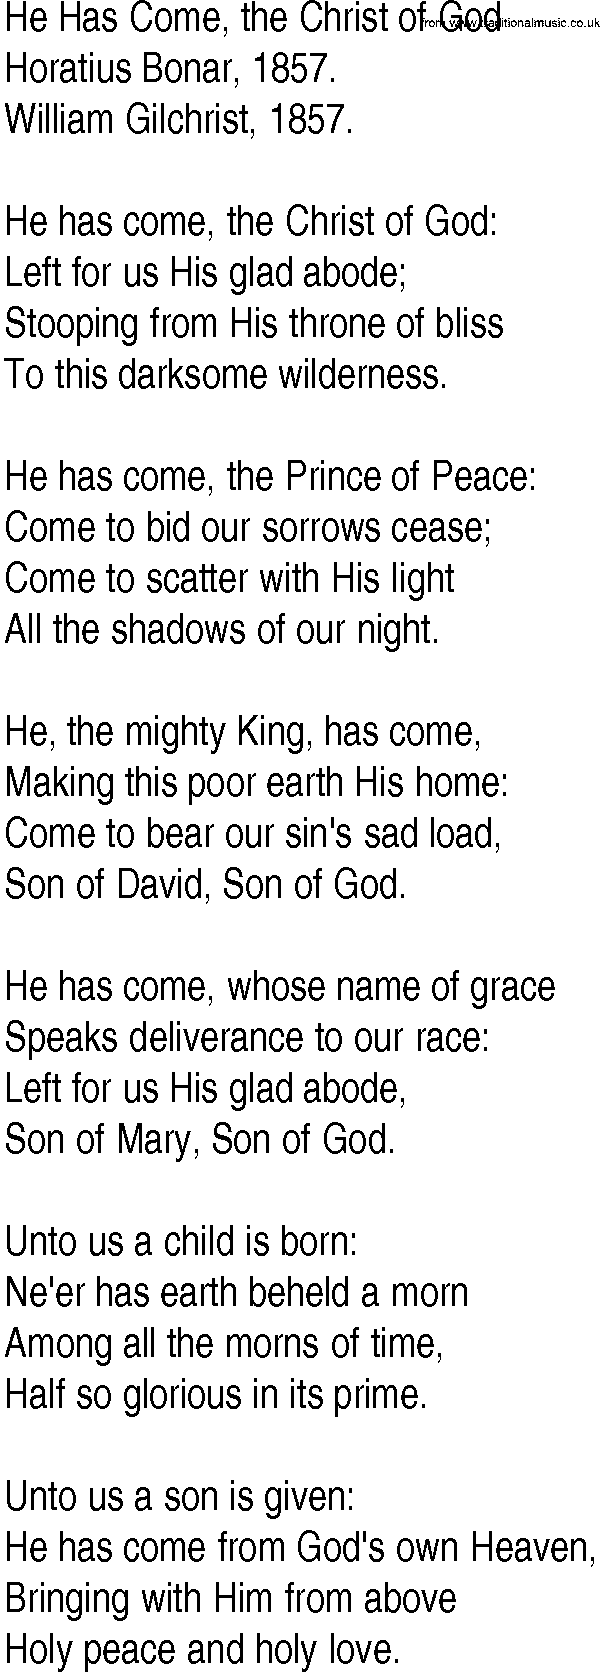 Hymn and Gospel Song: He Has Come, the Christ of God by Horatius Bonar lyrics